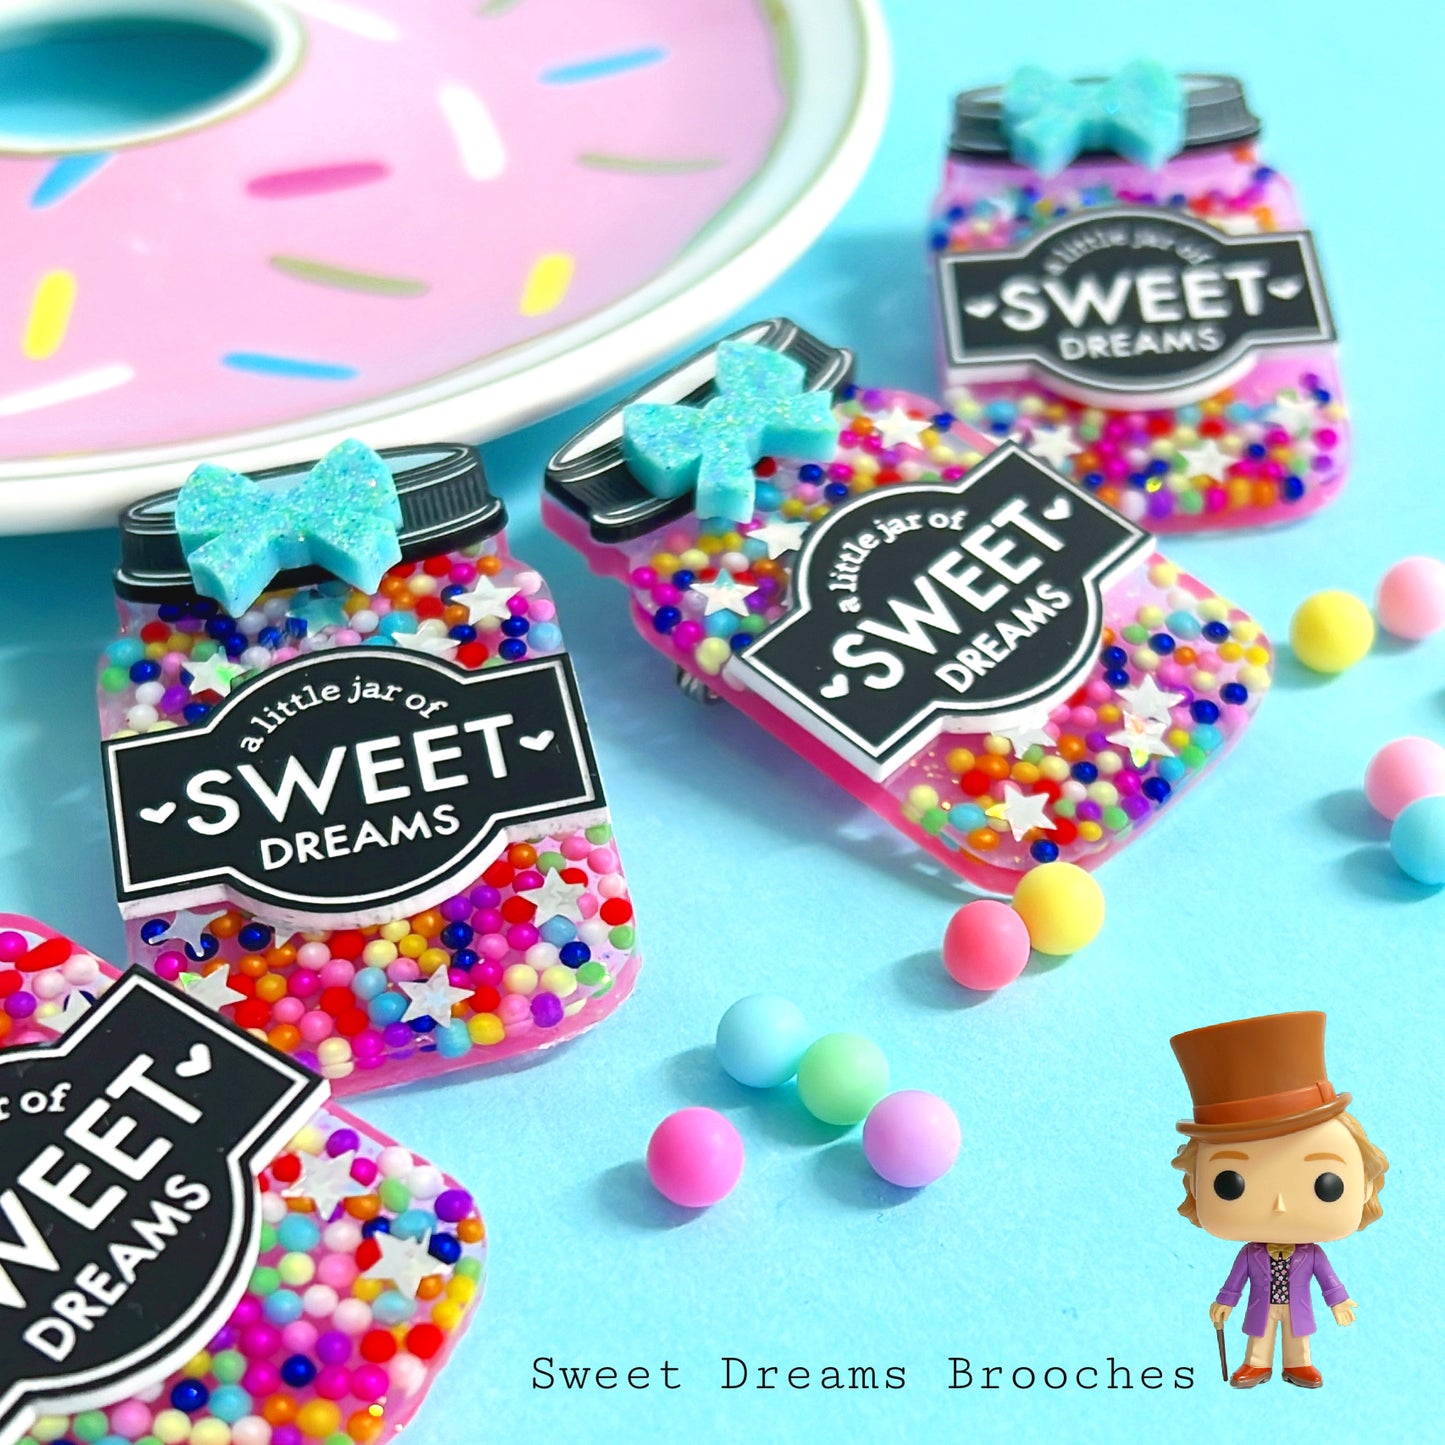 THE DREAMERS OF DREAMS : A LITTLE JAR OF SWEET DREAMS : CANDY : Handmade Resin & Acrylic BROOCH